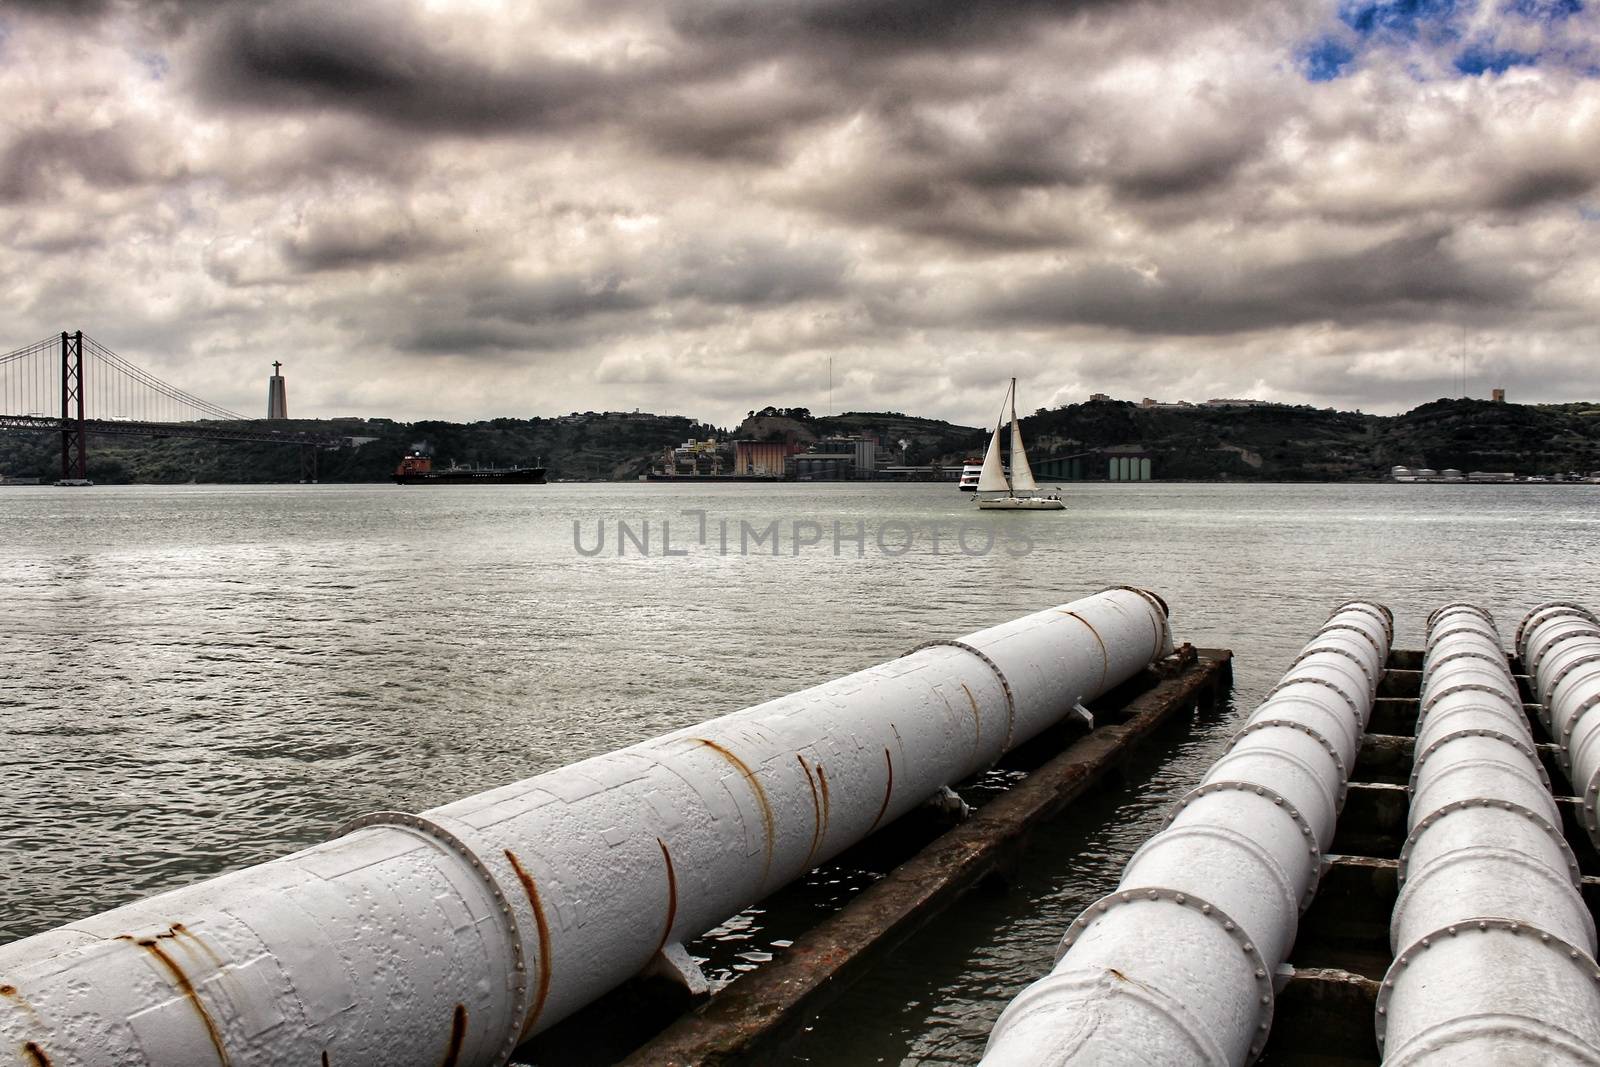 Drain pipes on the banks of The Tagus River in Lisbon, Portugal